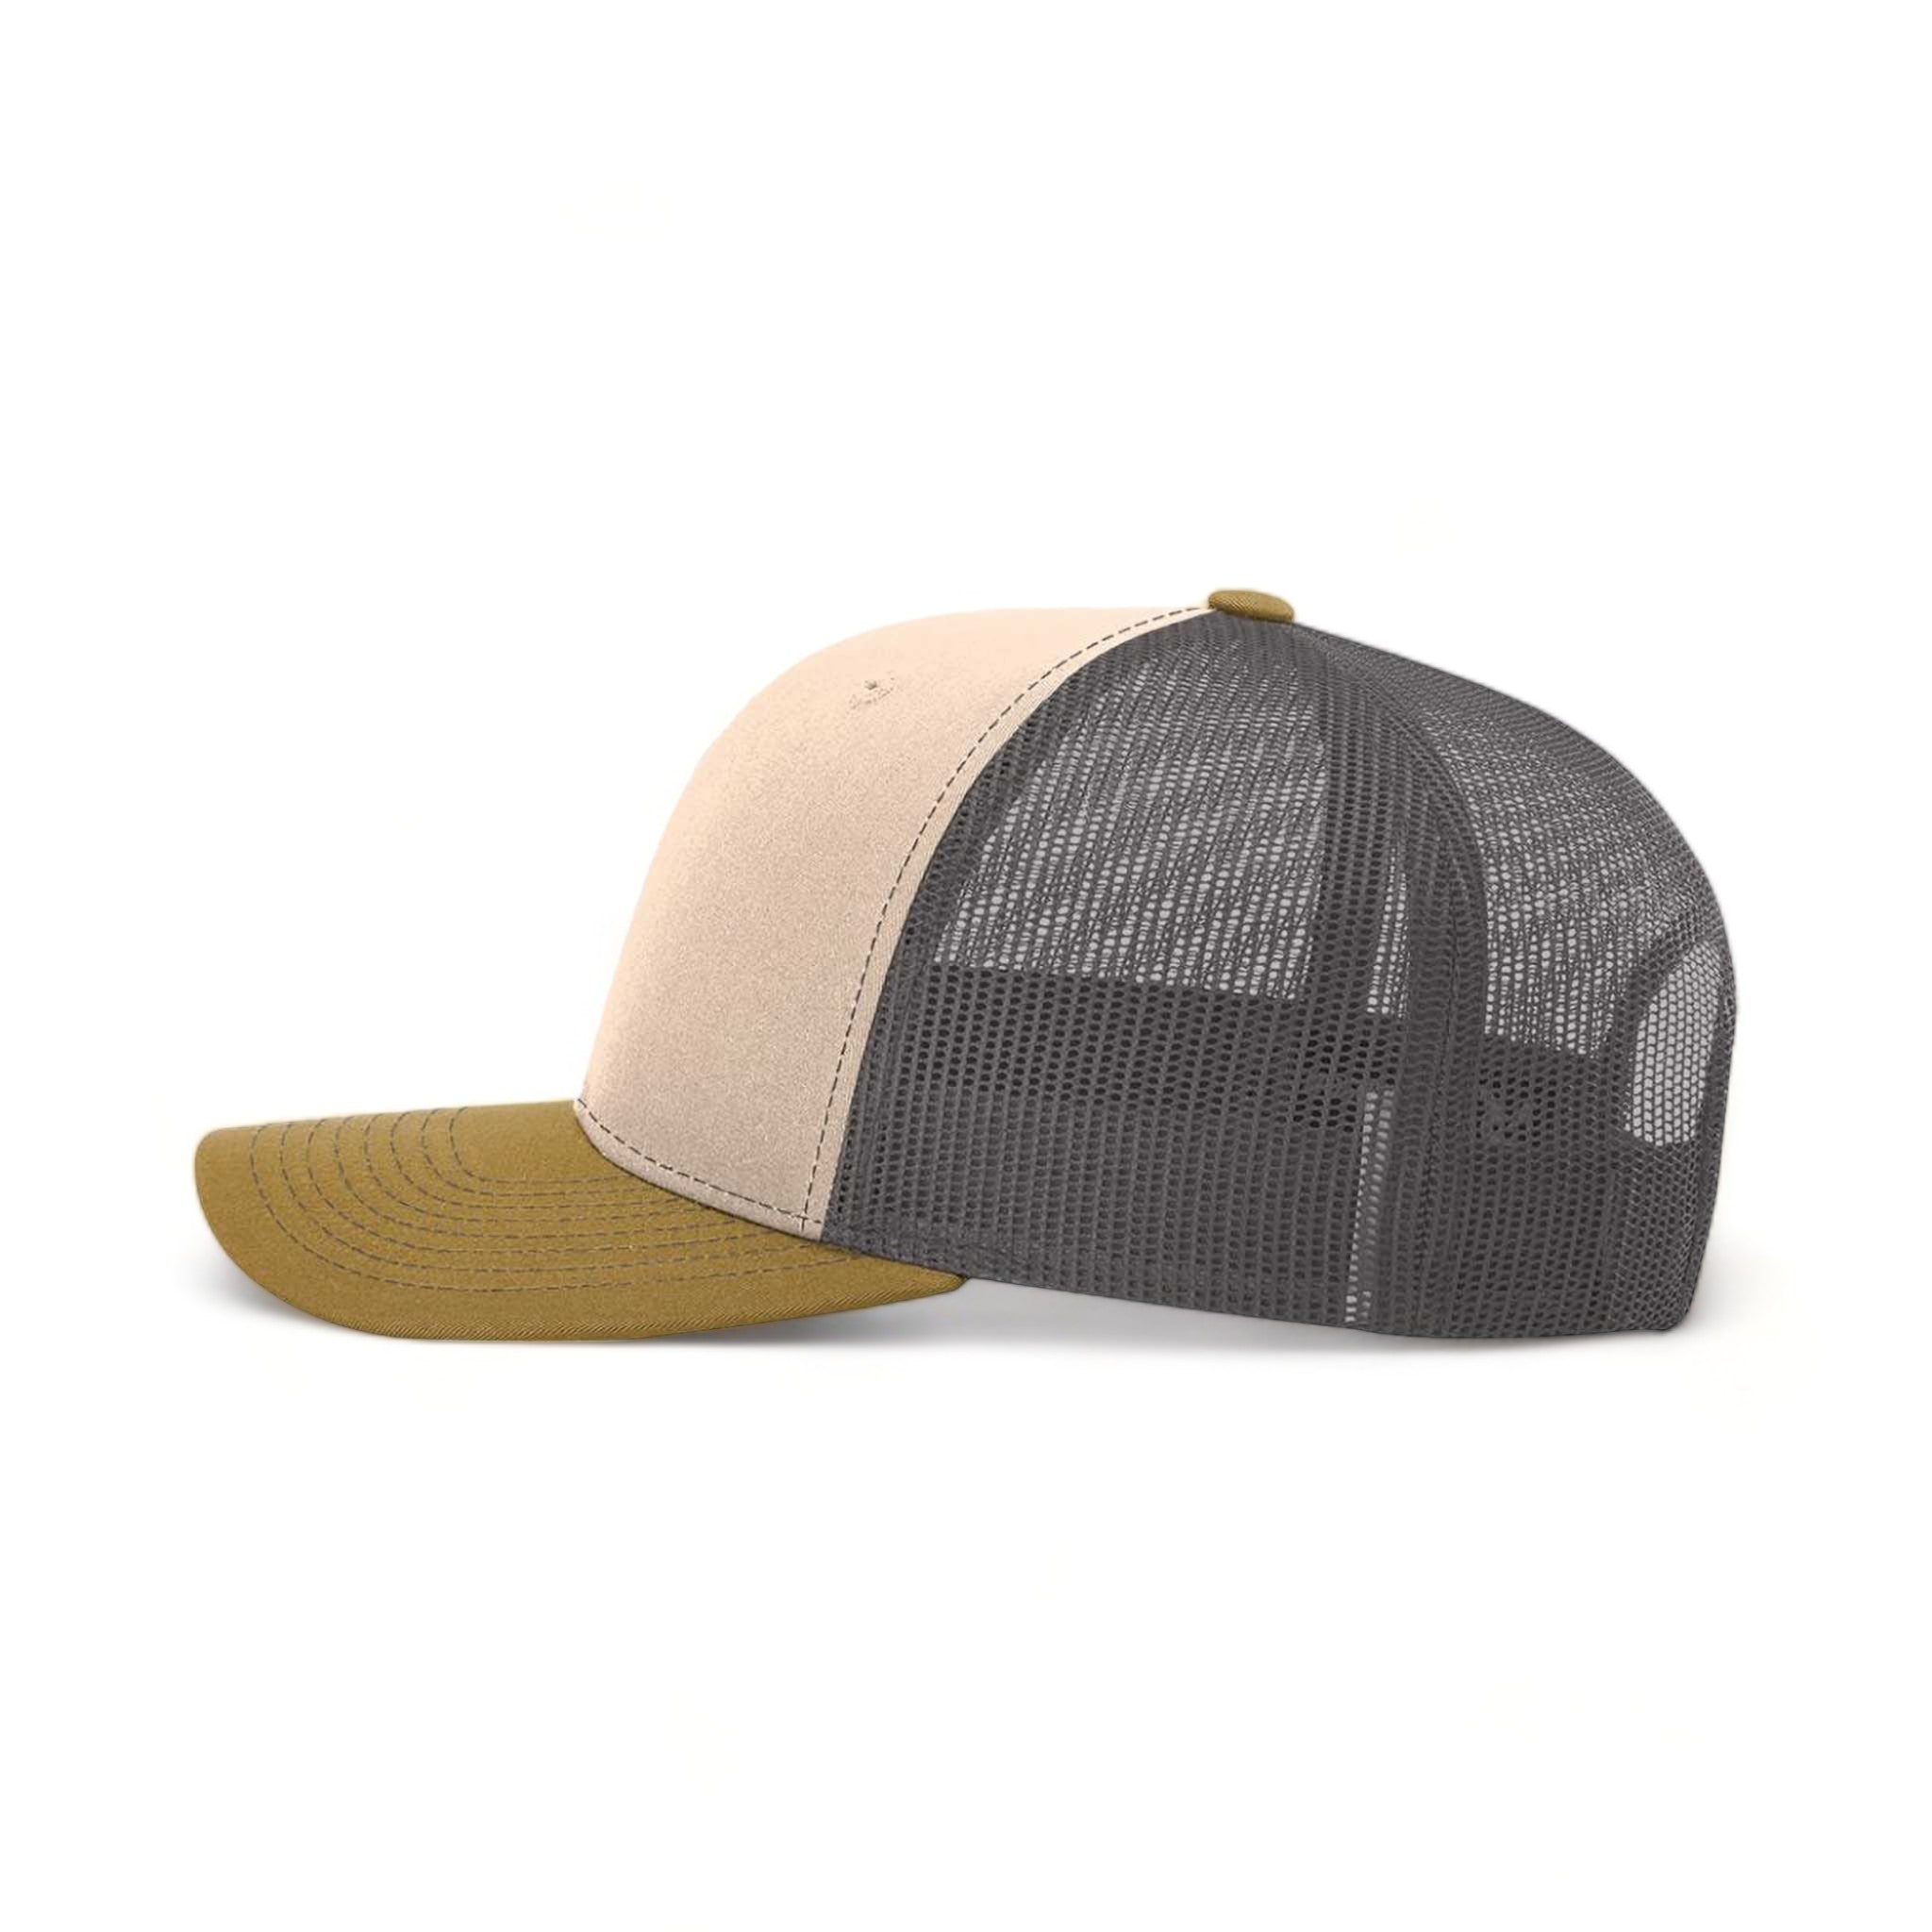 Side view of Richardson 112 custom hat in mink beige, charcoal and amber gold